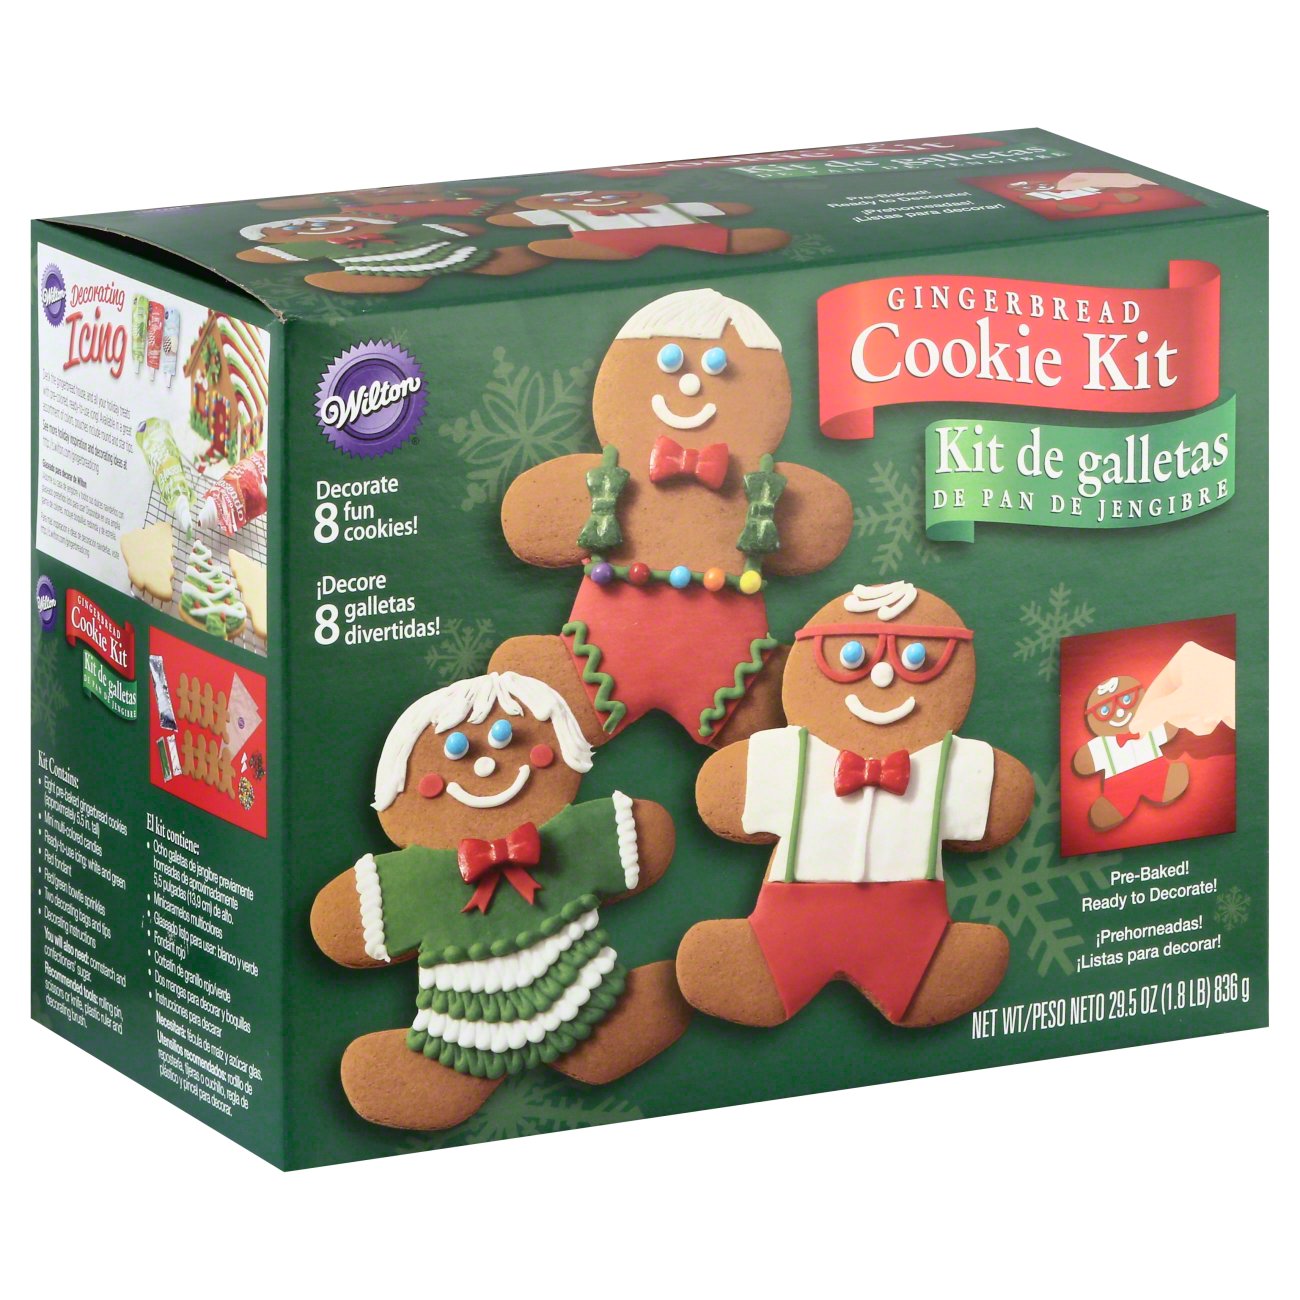 Wilton Holiday Cookie Icing Set - Shop Icing & Decorations at H-E-B